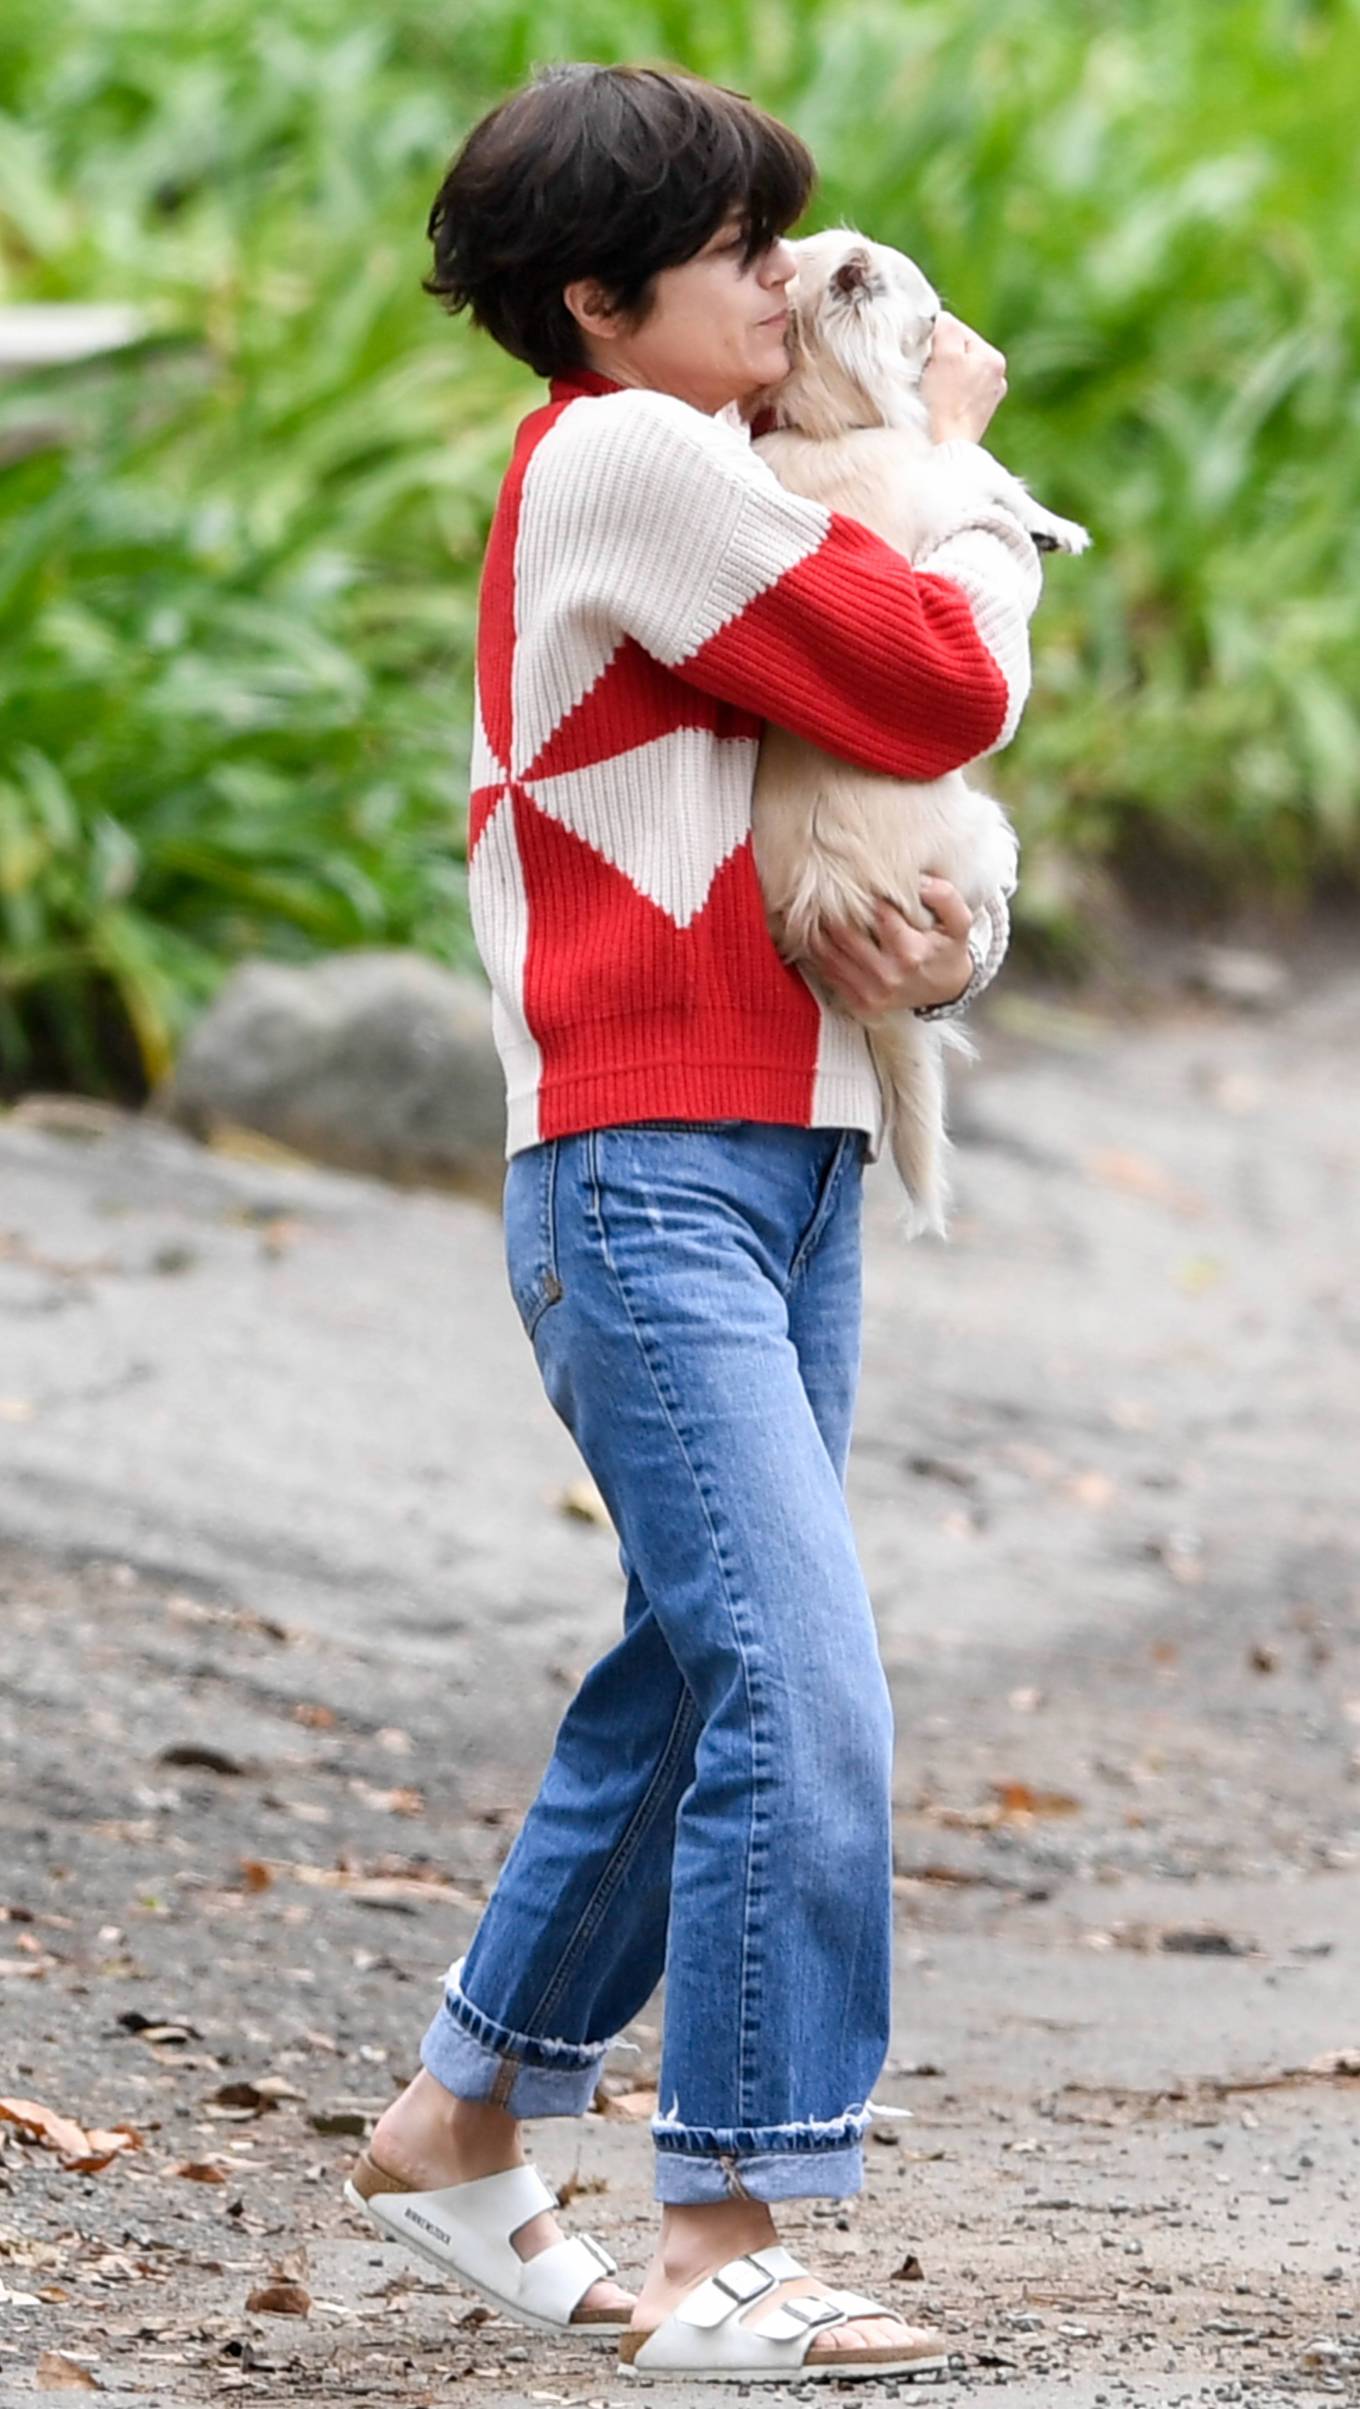 Selma Blair - Out with her dog around her neighborhood in Studio City